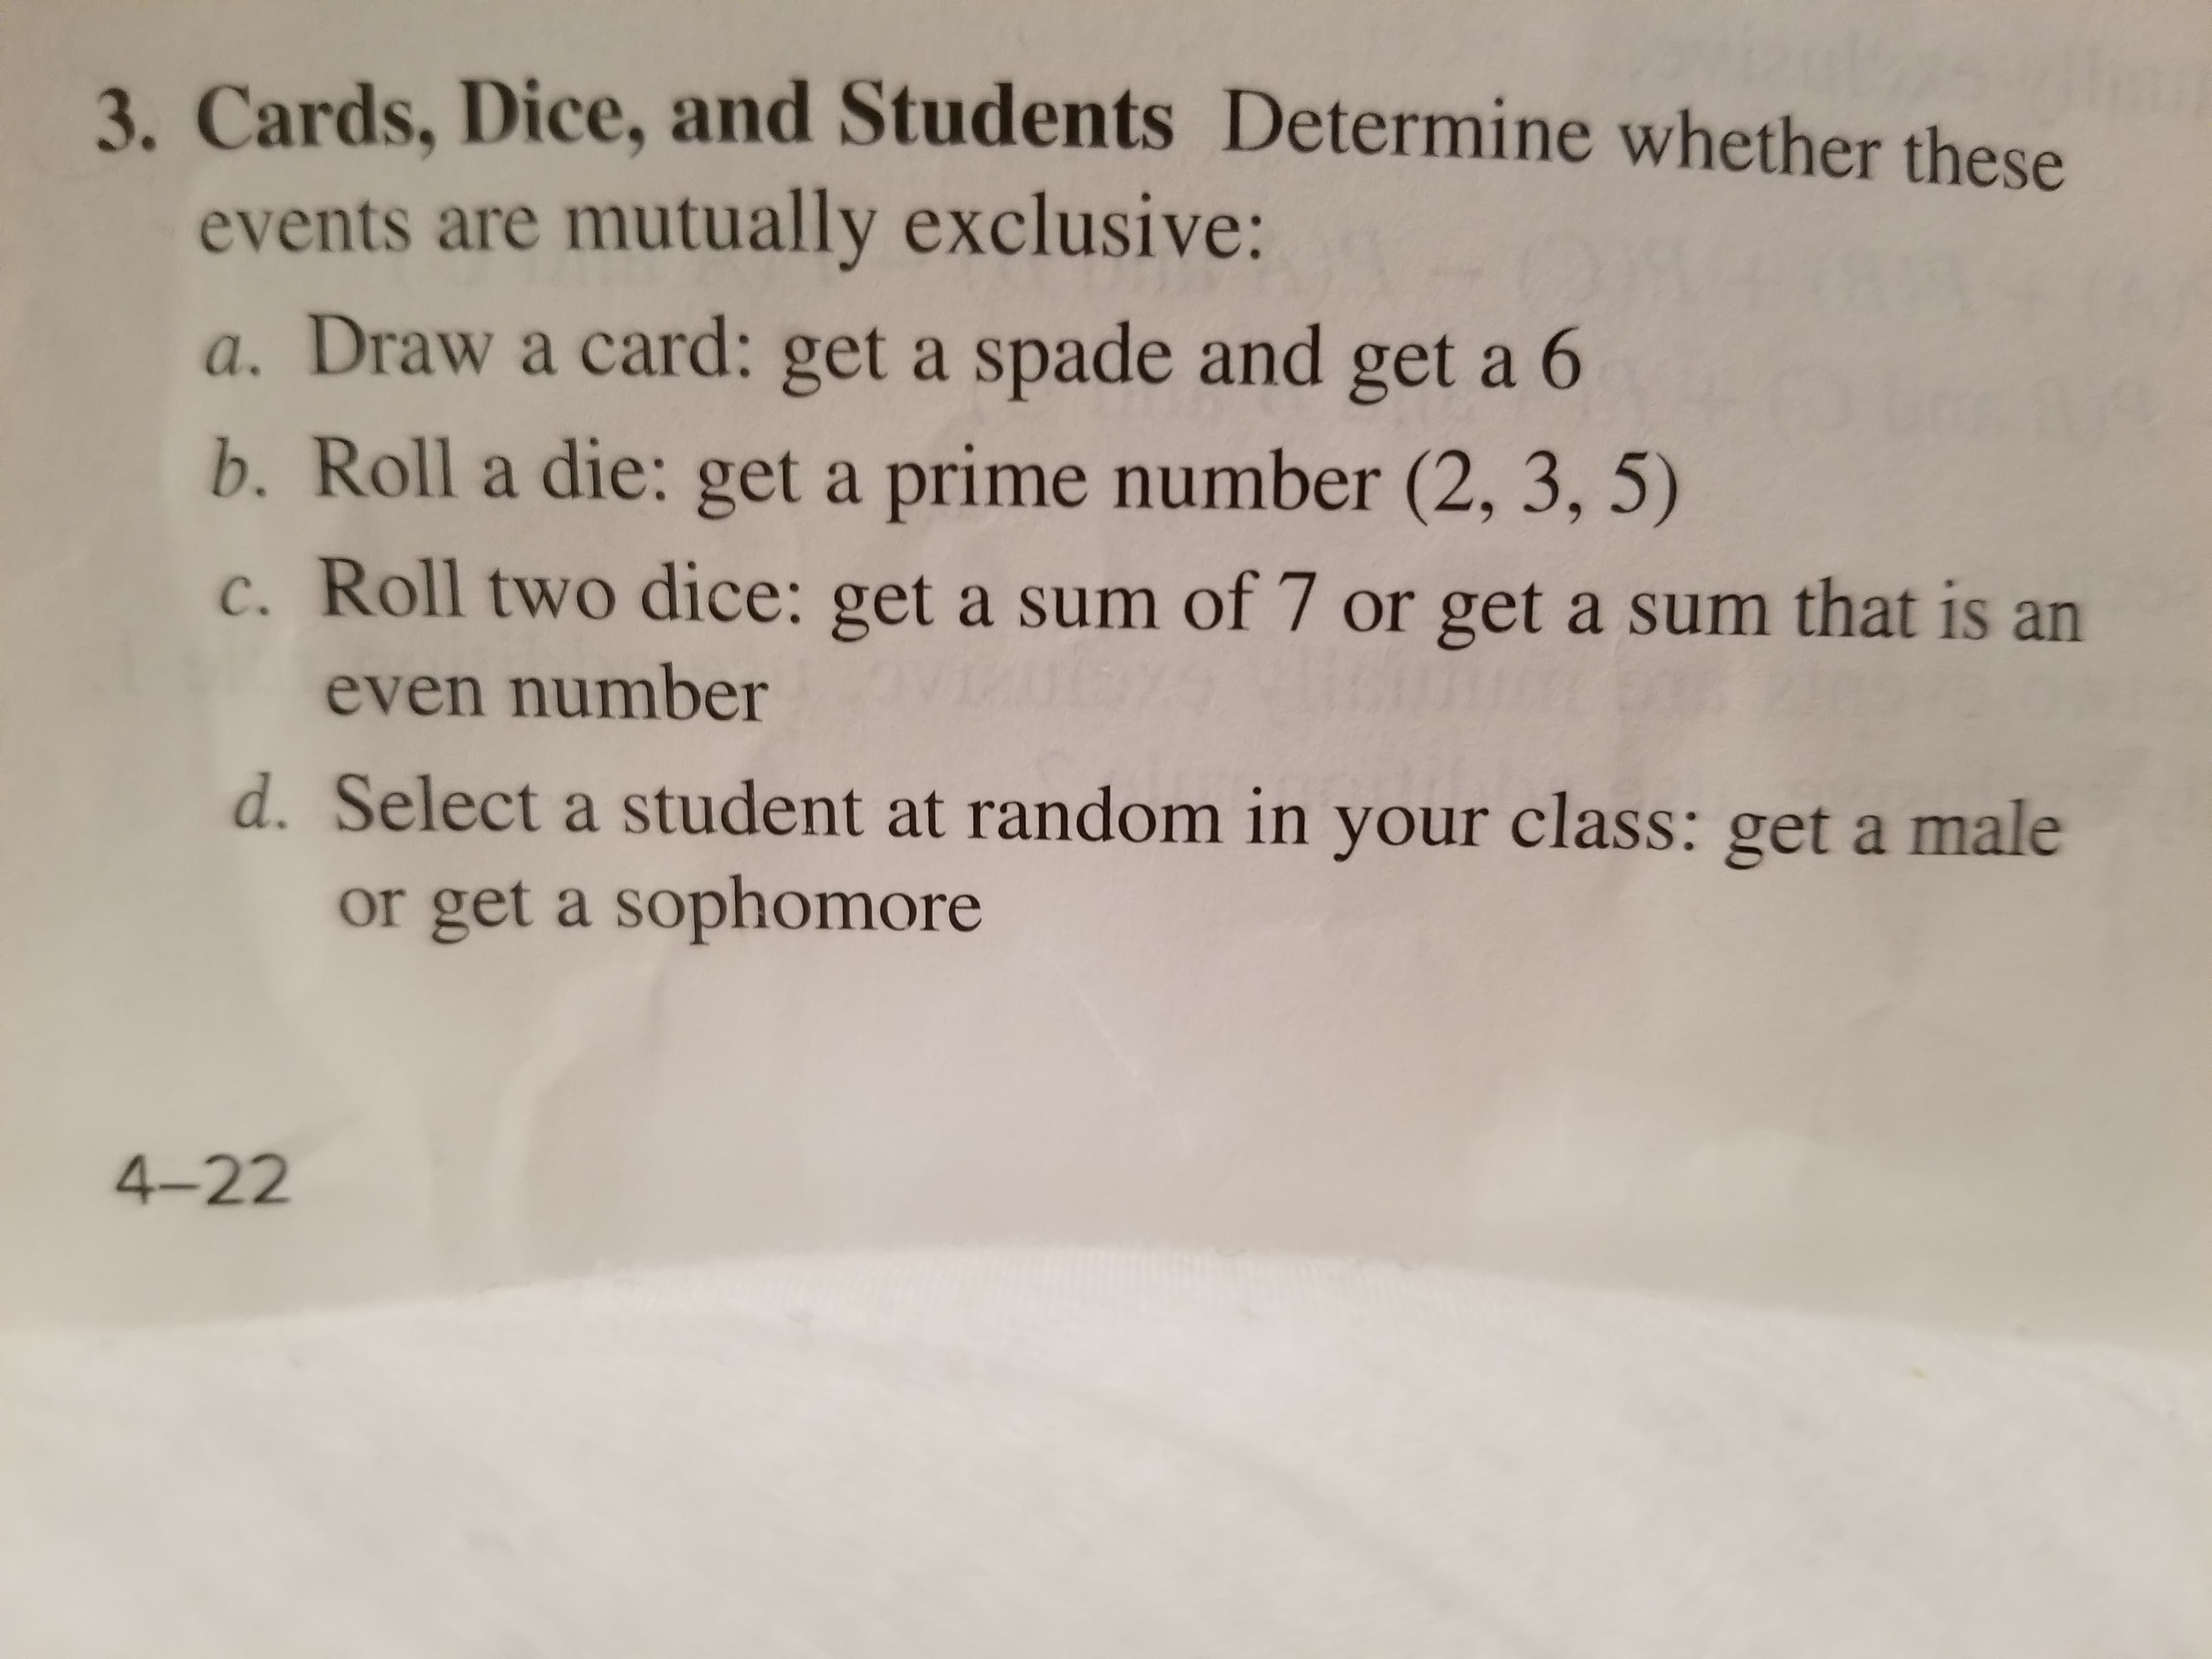 Cards, Dice, and Students Determine whether these
events are mutually exclusive:
a. Draw a card: get a spade and get a 6
b. Roll a die: get a prime number (2, 3, 5)
c. Roll two dice: get a sum of 7 or get a sum that is an
3.
even number
d. Select a student at random in your class: get a male
or get a sophomore
4-22
